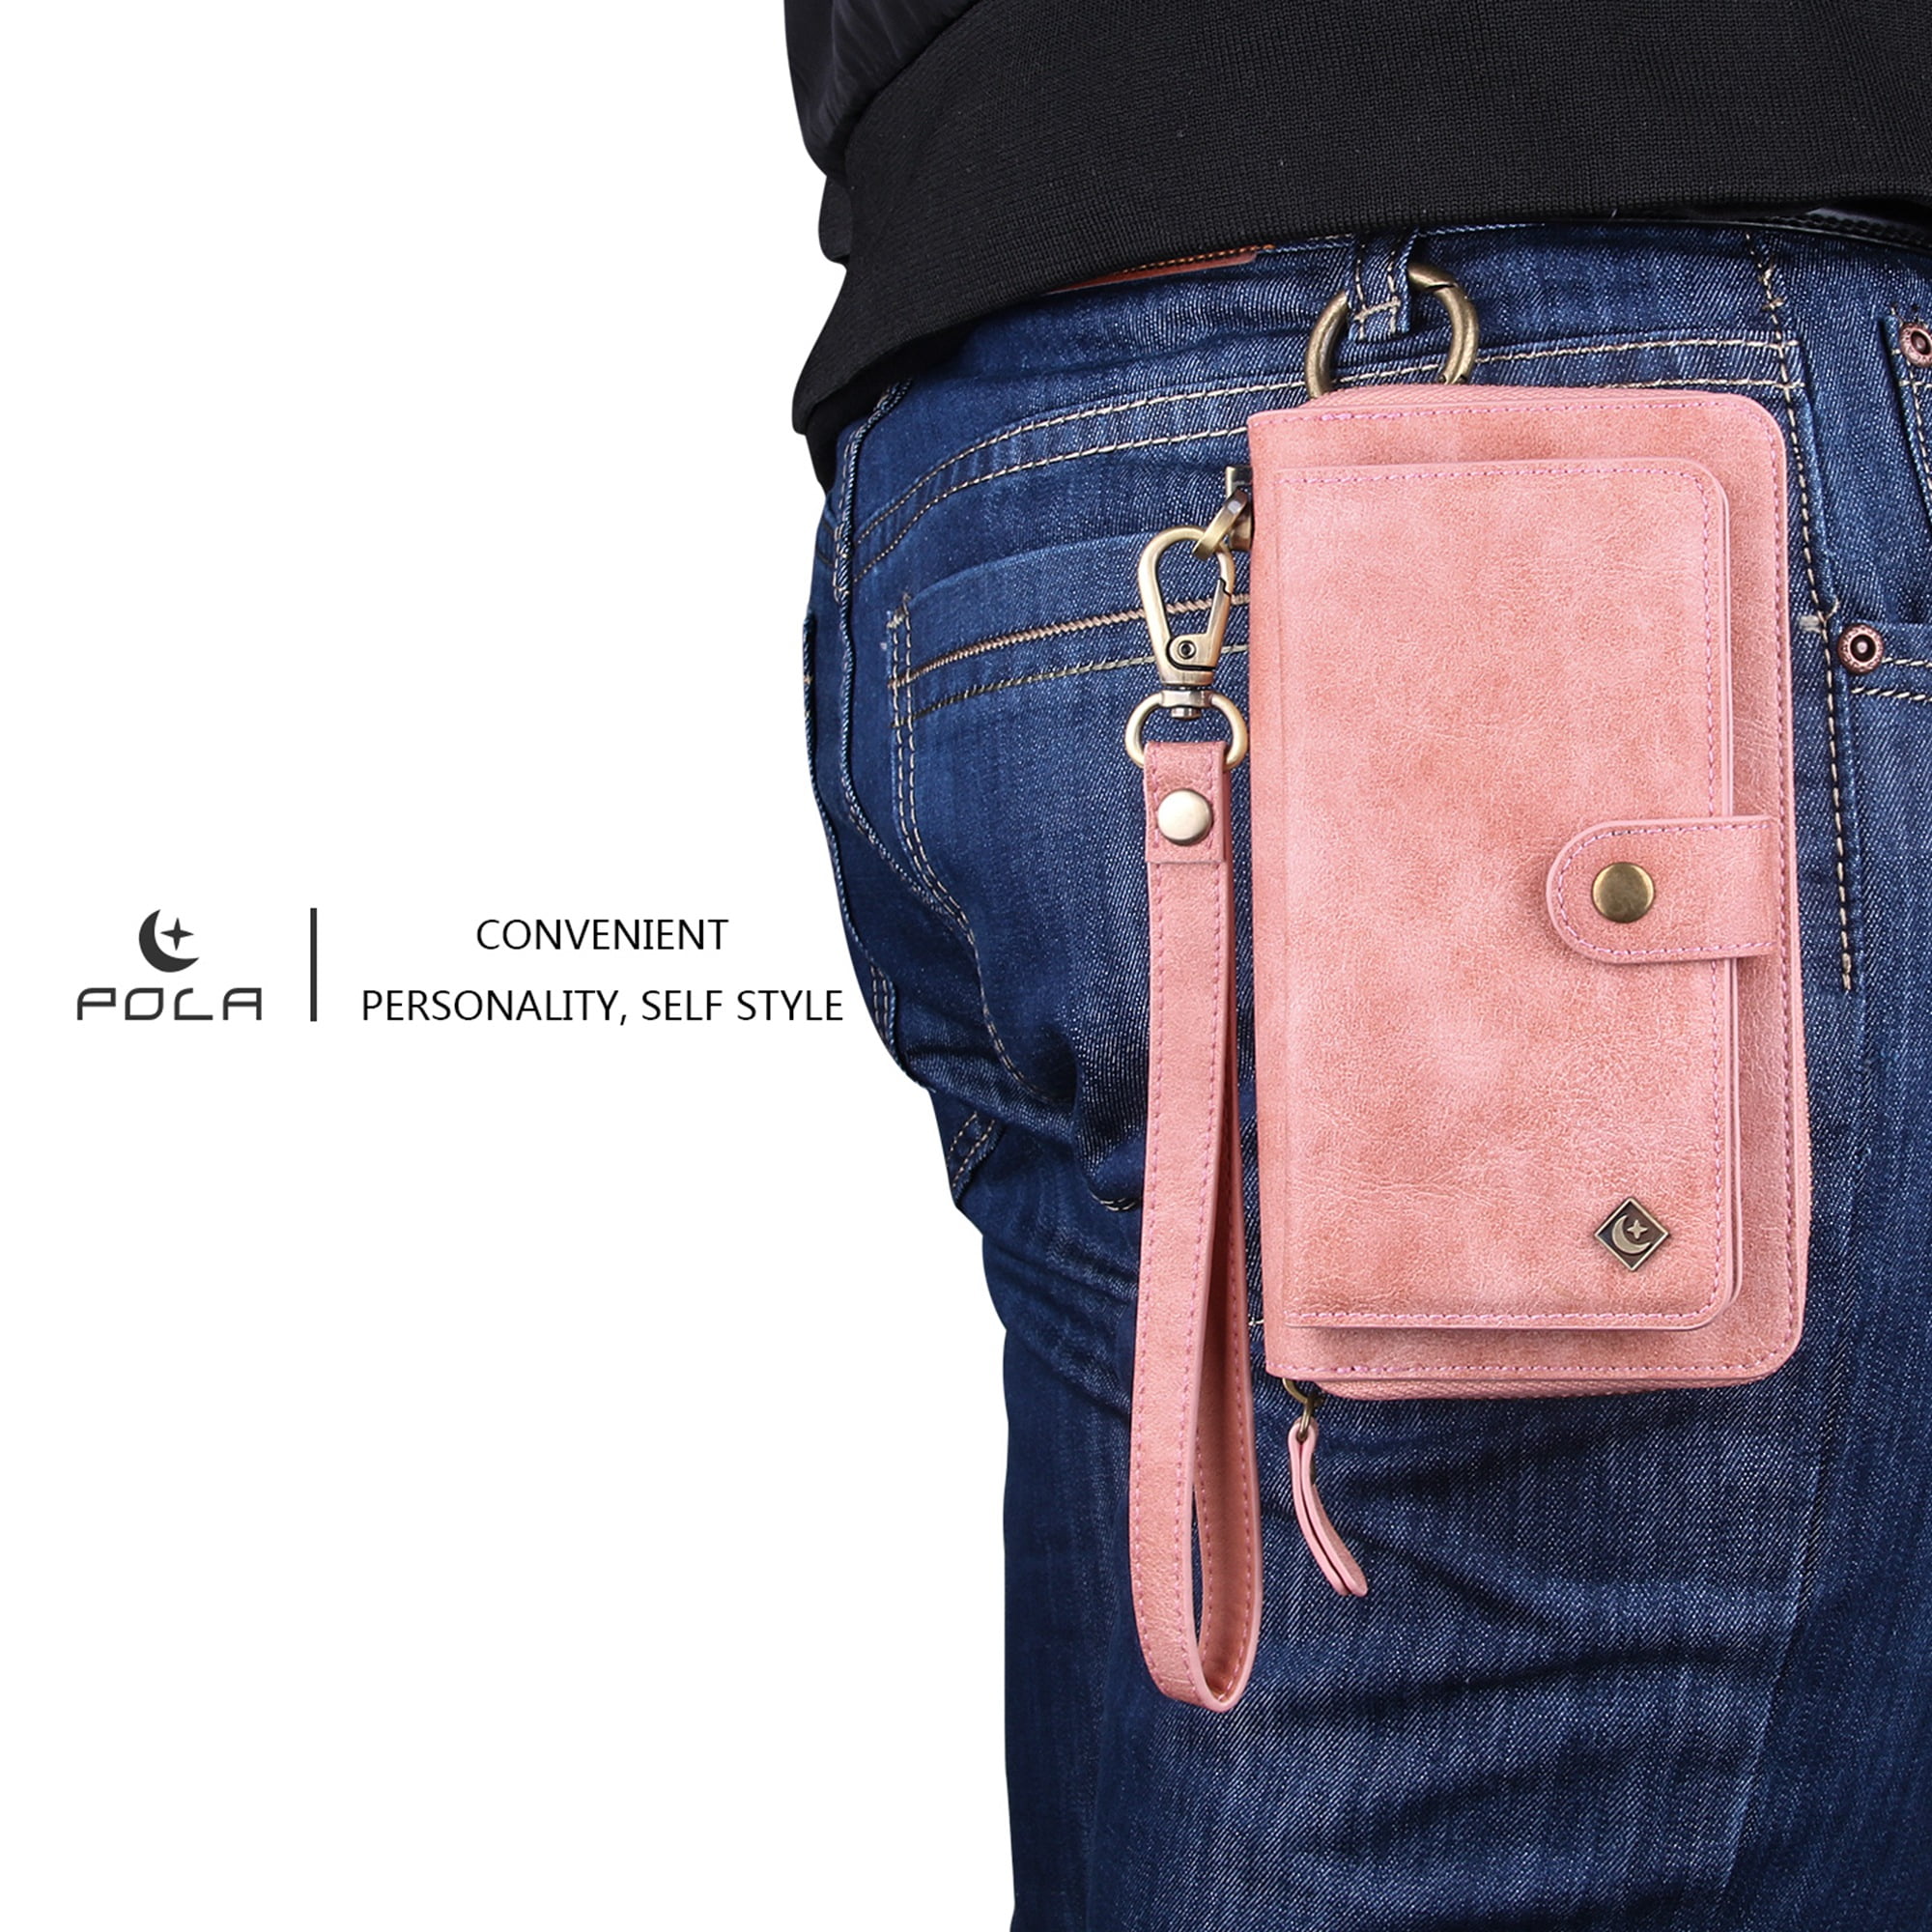 Buy Phone Case for iPhone Xs MAX, Classic Style Elegant Luxury Fashion  Designer Wallet Lanyard Case with Card Holder Case Cover iPhone Xs MAX- -  US Fast Deliver Guarantee FBA Online at